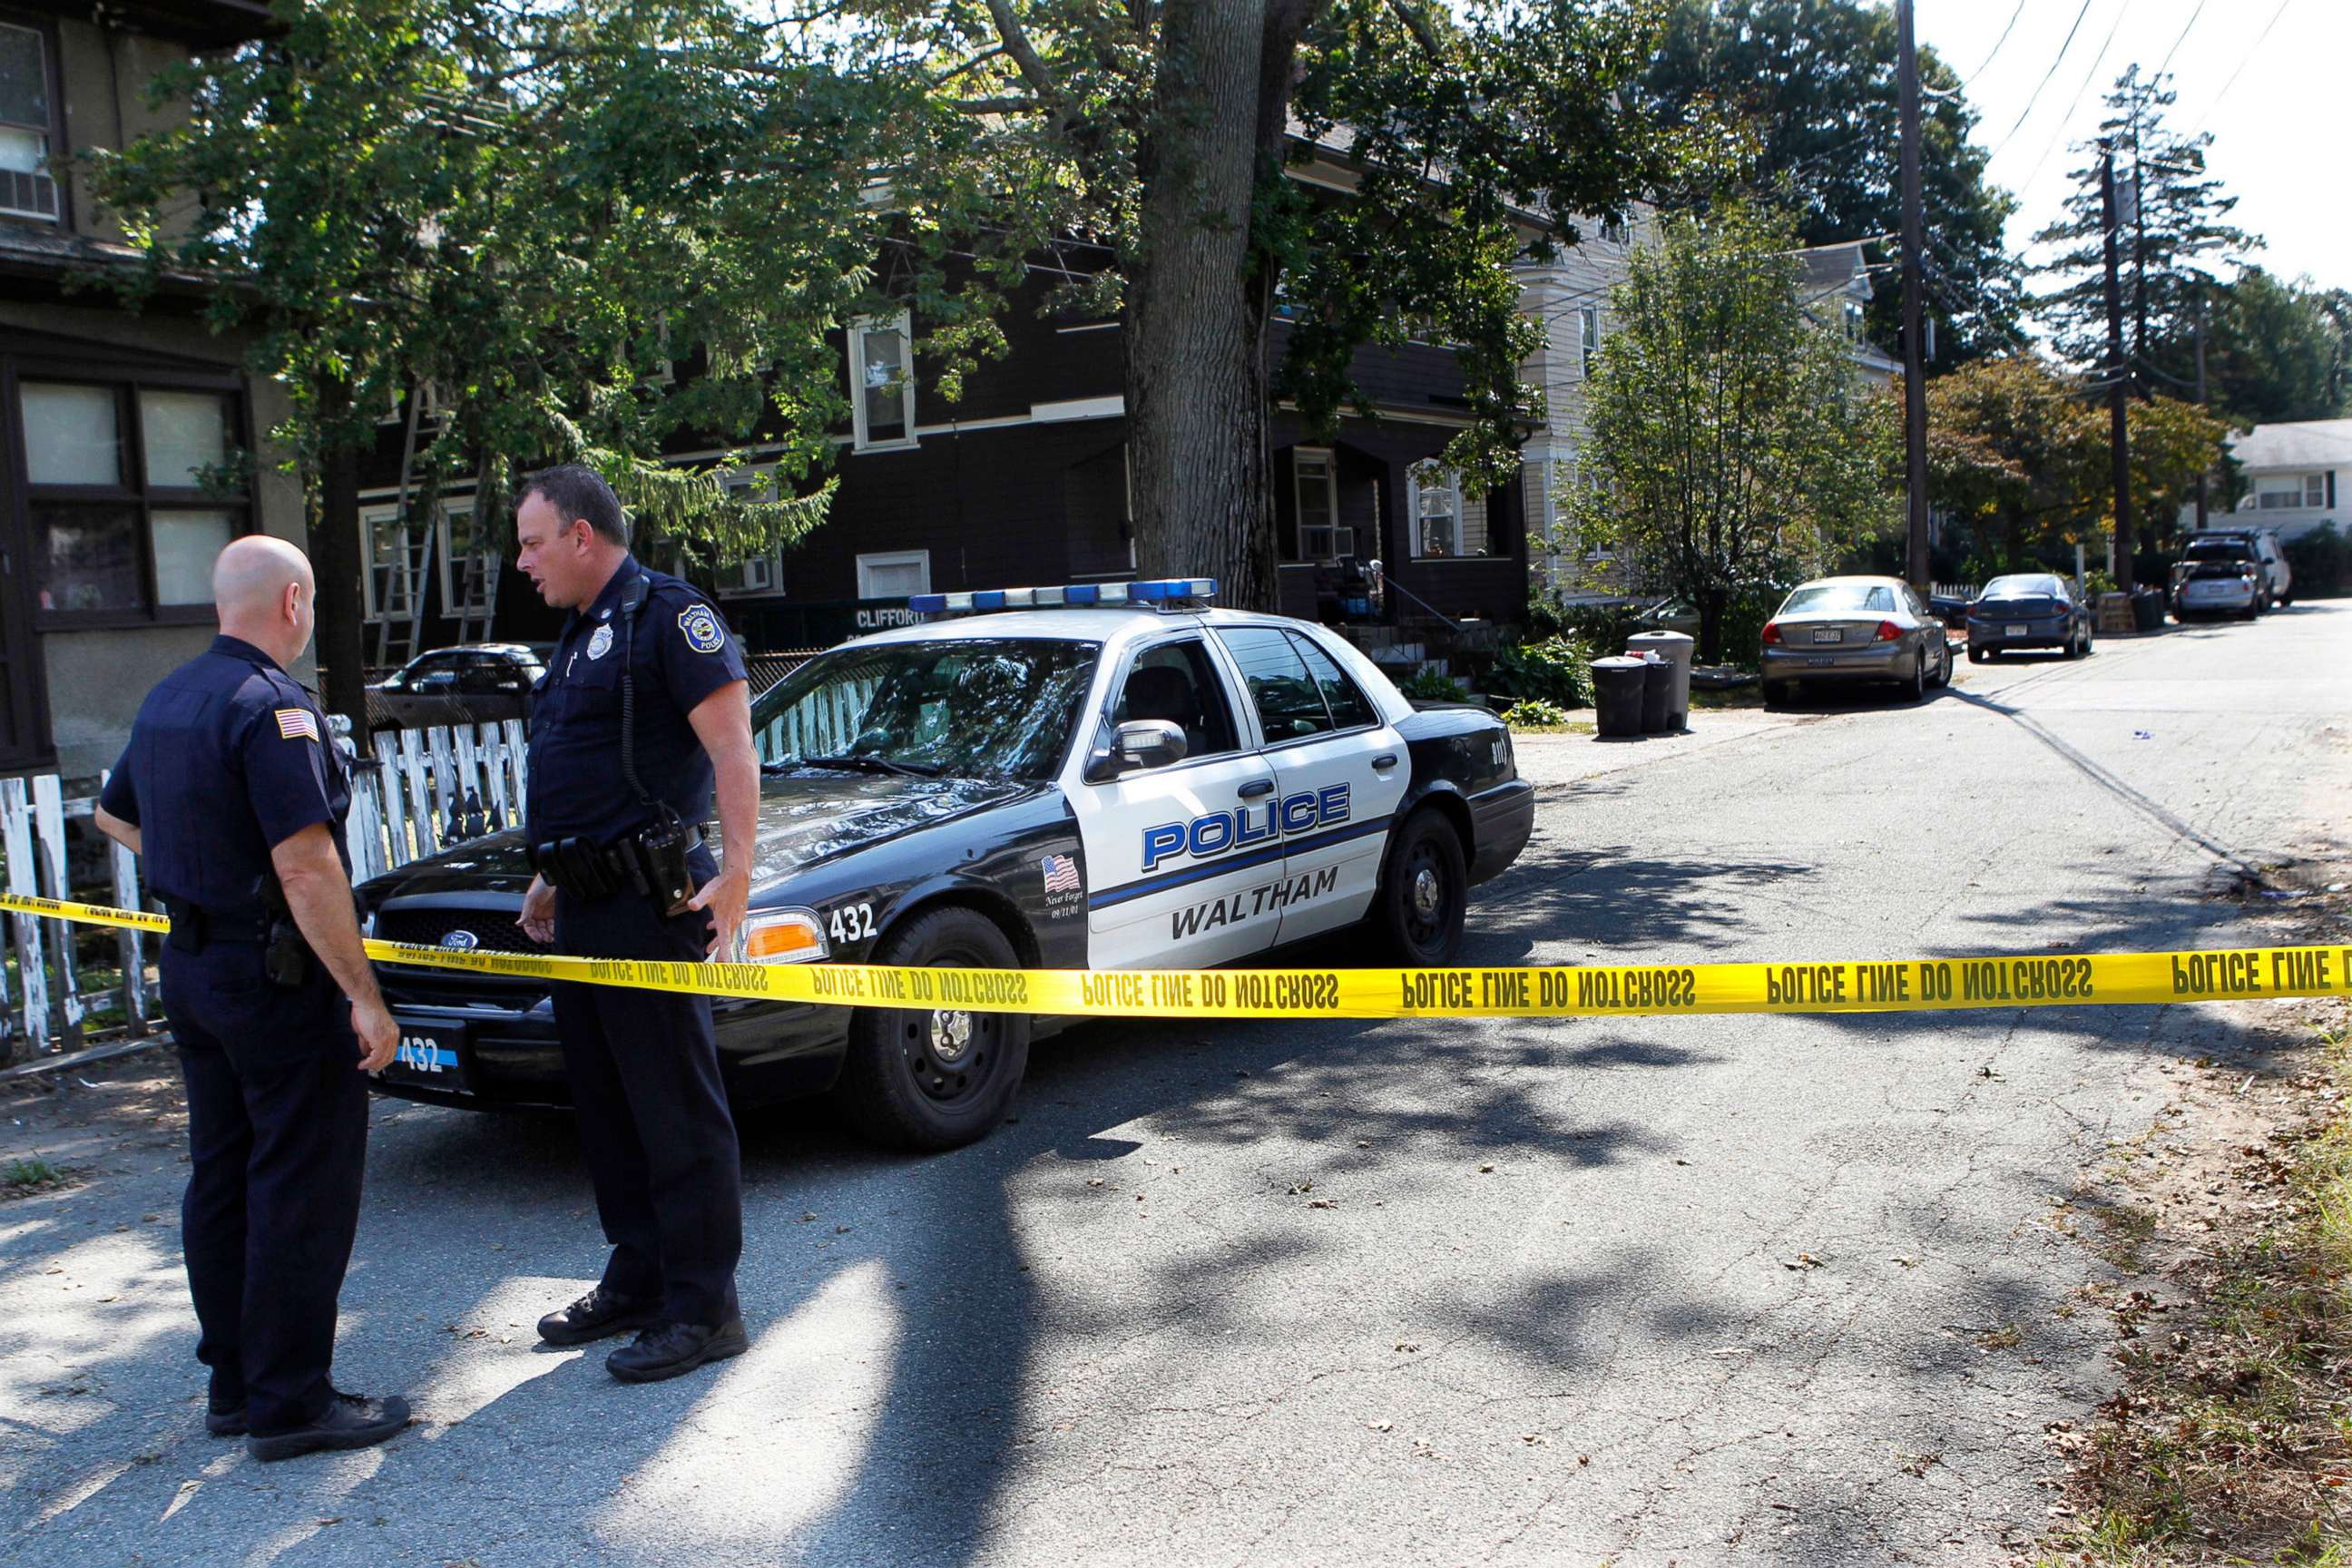 PHOTO: In this Sept. 13, 2011, file photo, police remain at an outpost on Harding Ave., in Waltham, Mass., after three men were found dead the previous day in the yellow house at center, behind the trash cans.